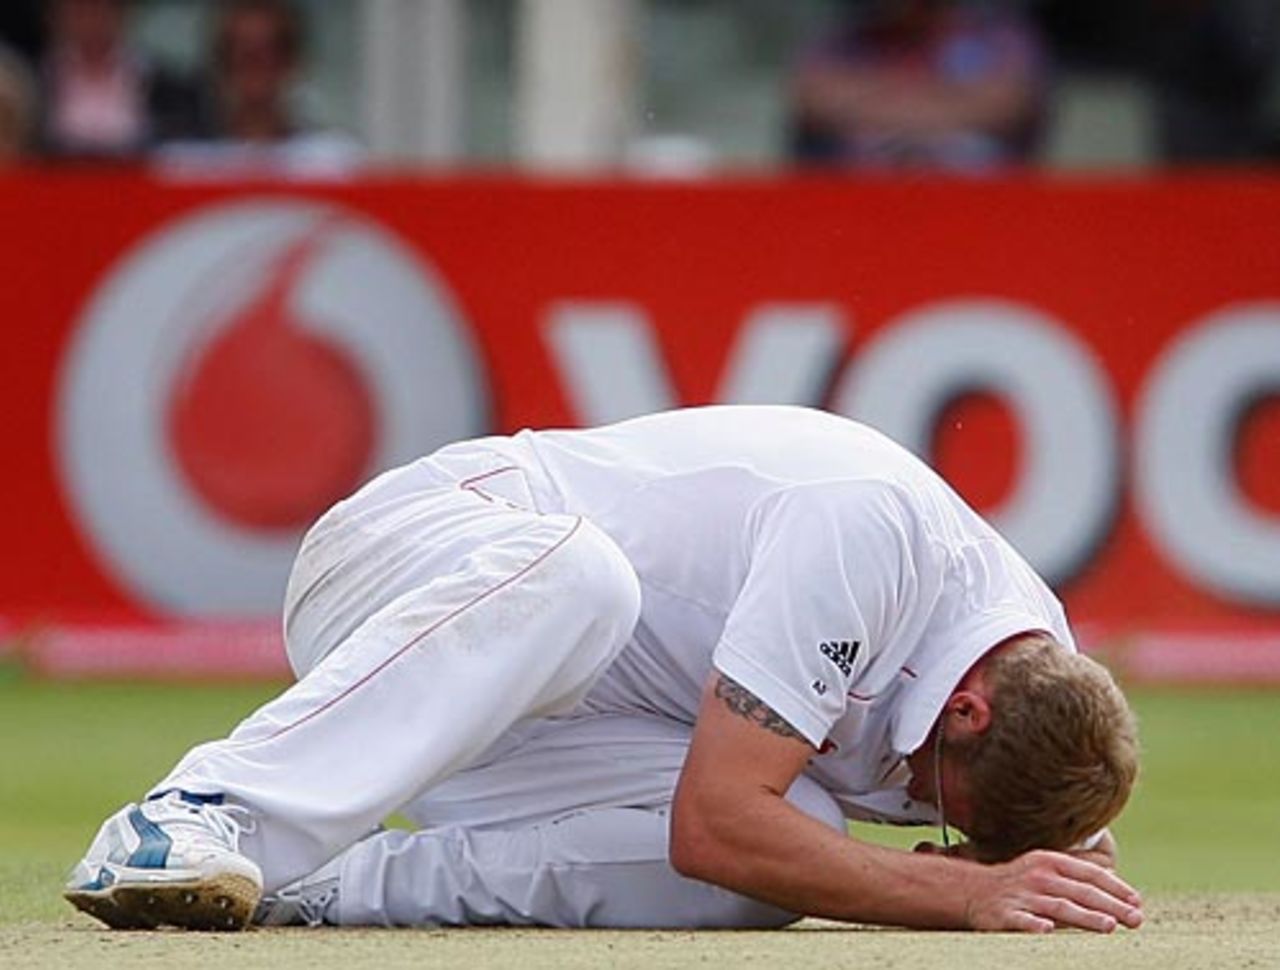 Andrew Flintoff is slow to get up after falling, England v Australia, 3rd Test, Edgbaston, 5th day, August 3, 2009